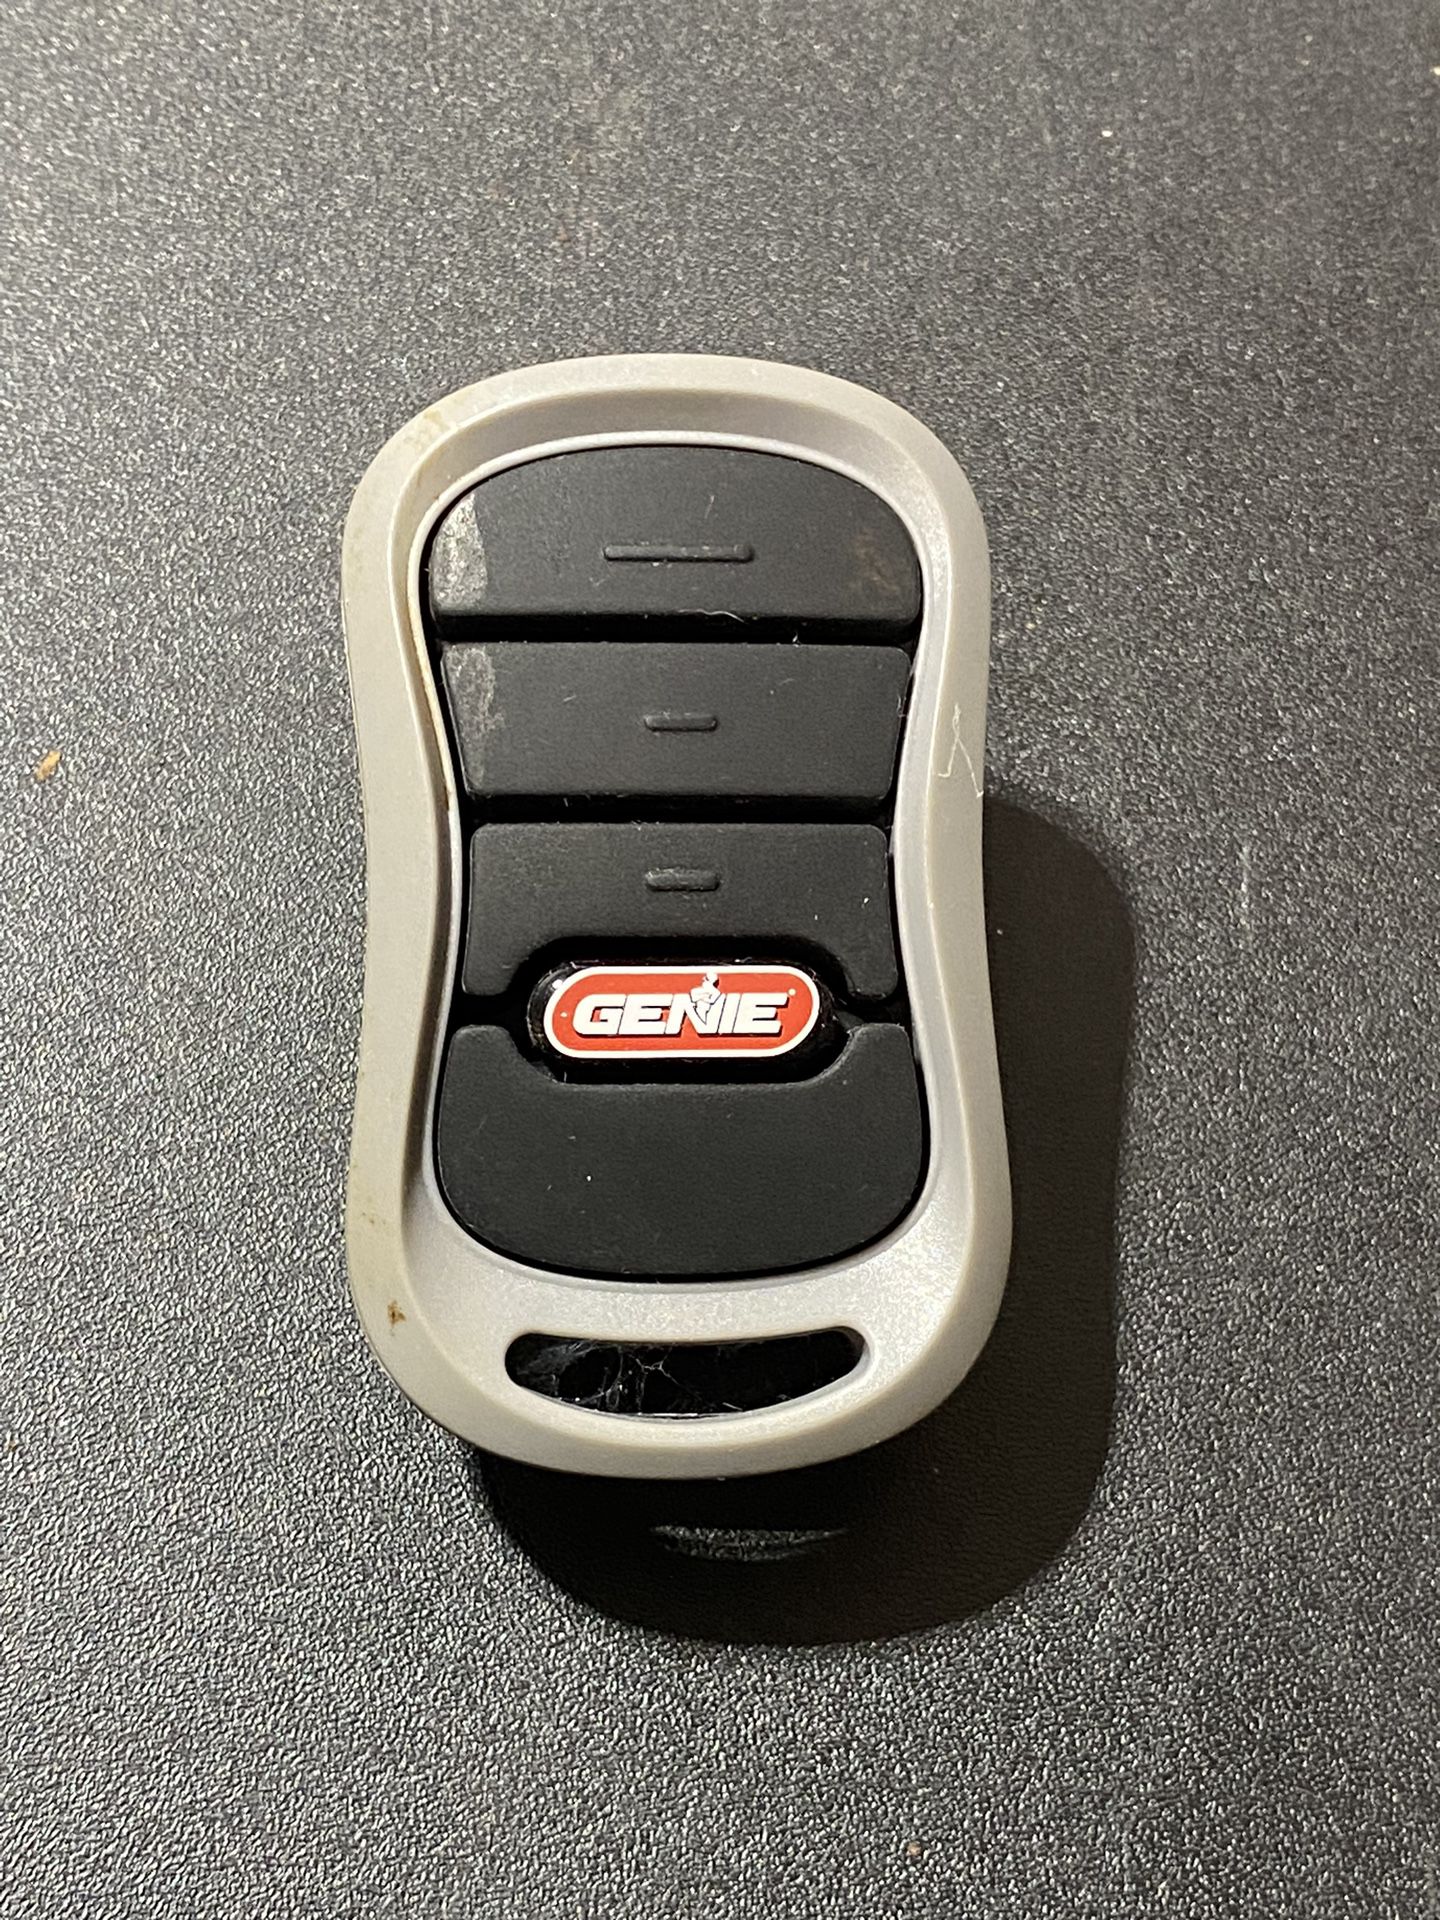 Genie Model G3T-A 3 Button Garage Door Remote Control Opener Fob W/Visor Clip. Tested and working.